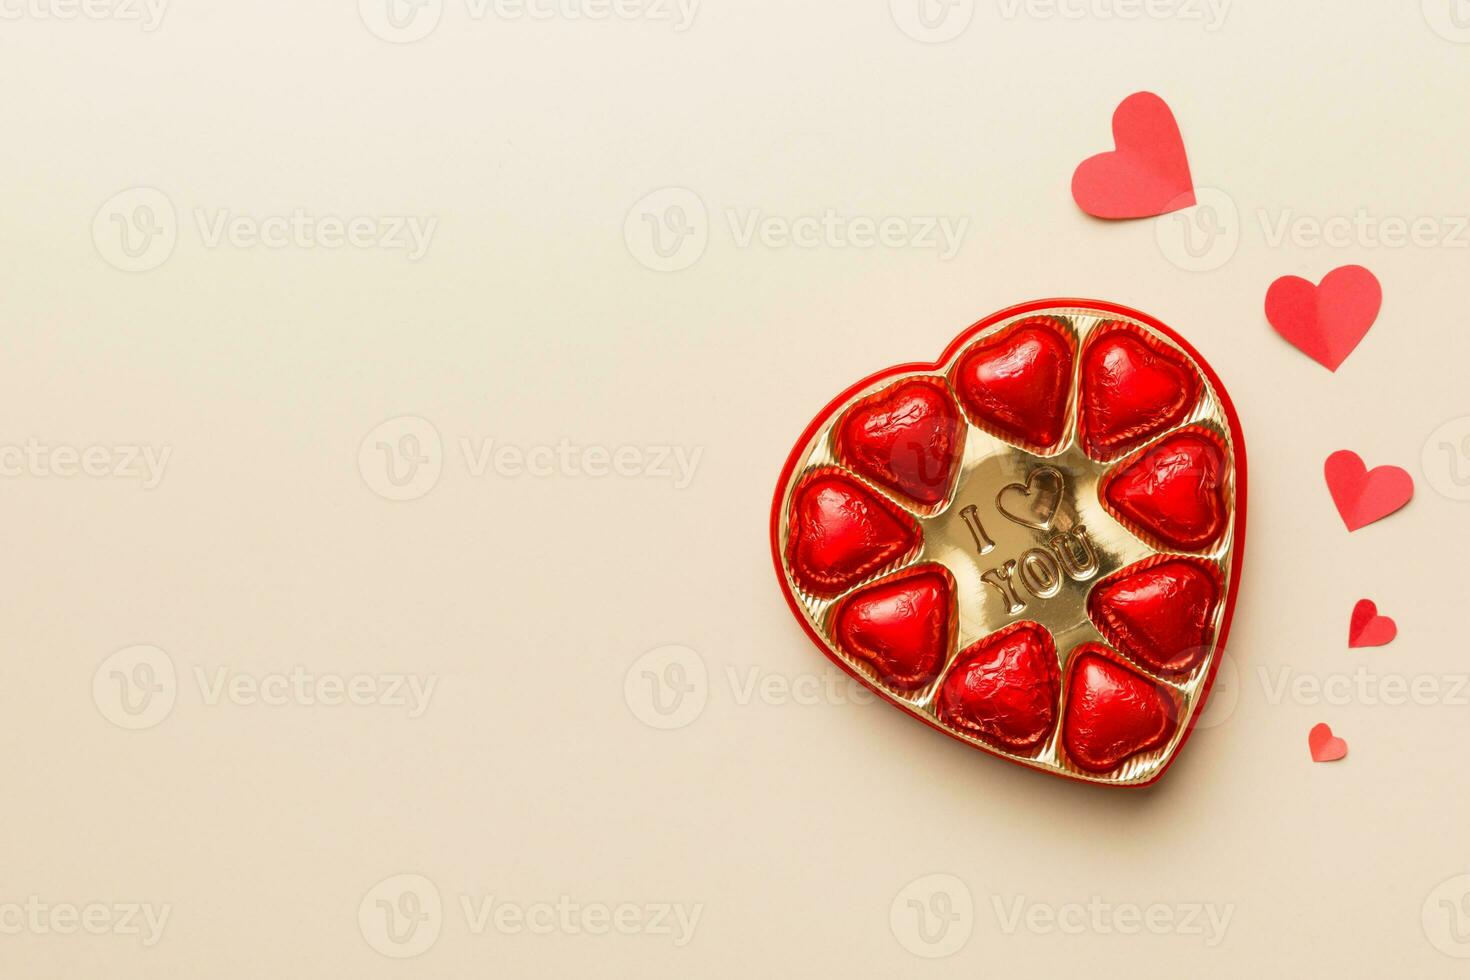 Delicious chocolate pralines in red box for Valentine's Day. Heart shaped box of chocolates top view with copy space photo